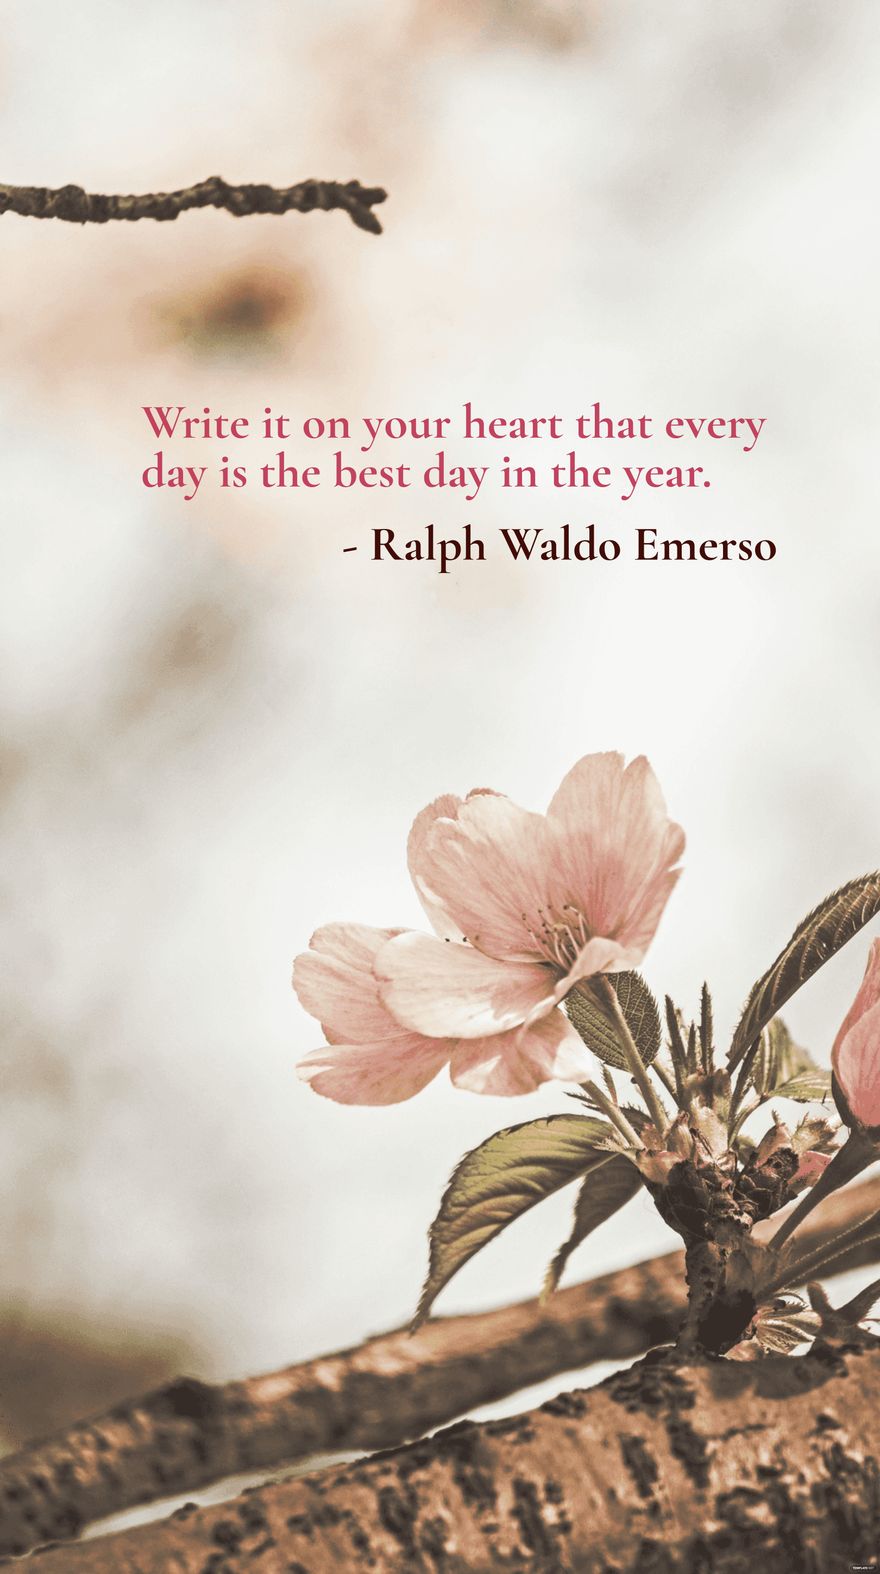 write-it-on-your-heart-that-every-day-is-the-best-day-in-the-year-in